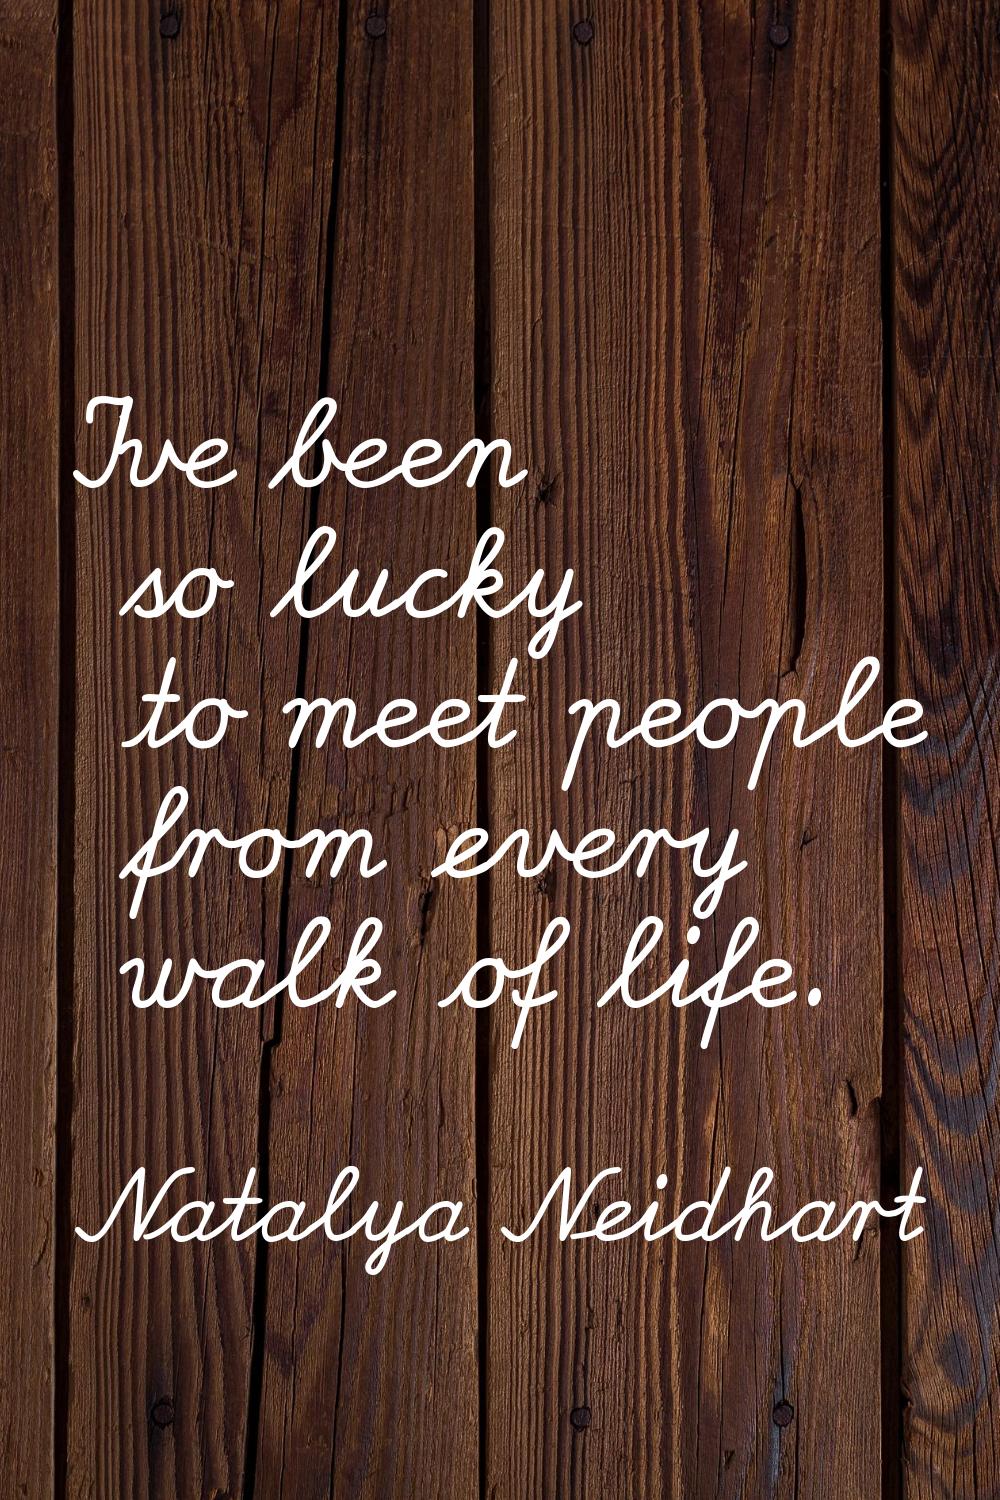 I've been so lucky to meet people from every walk of life.